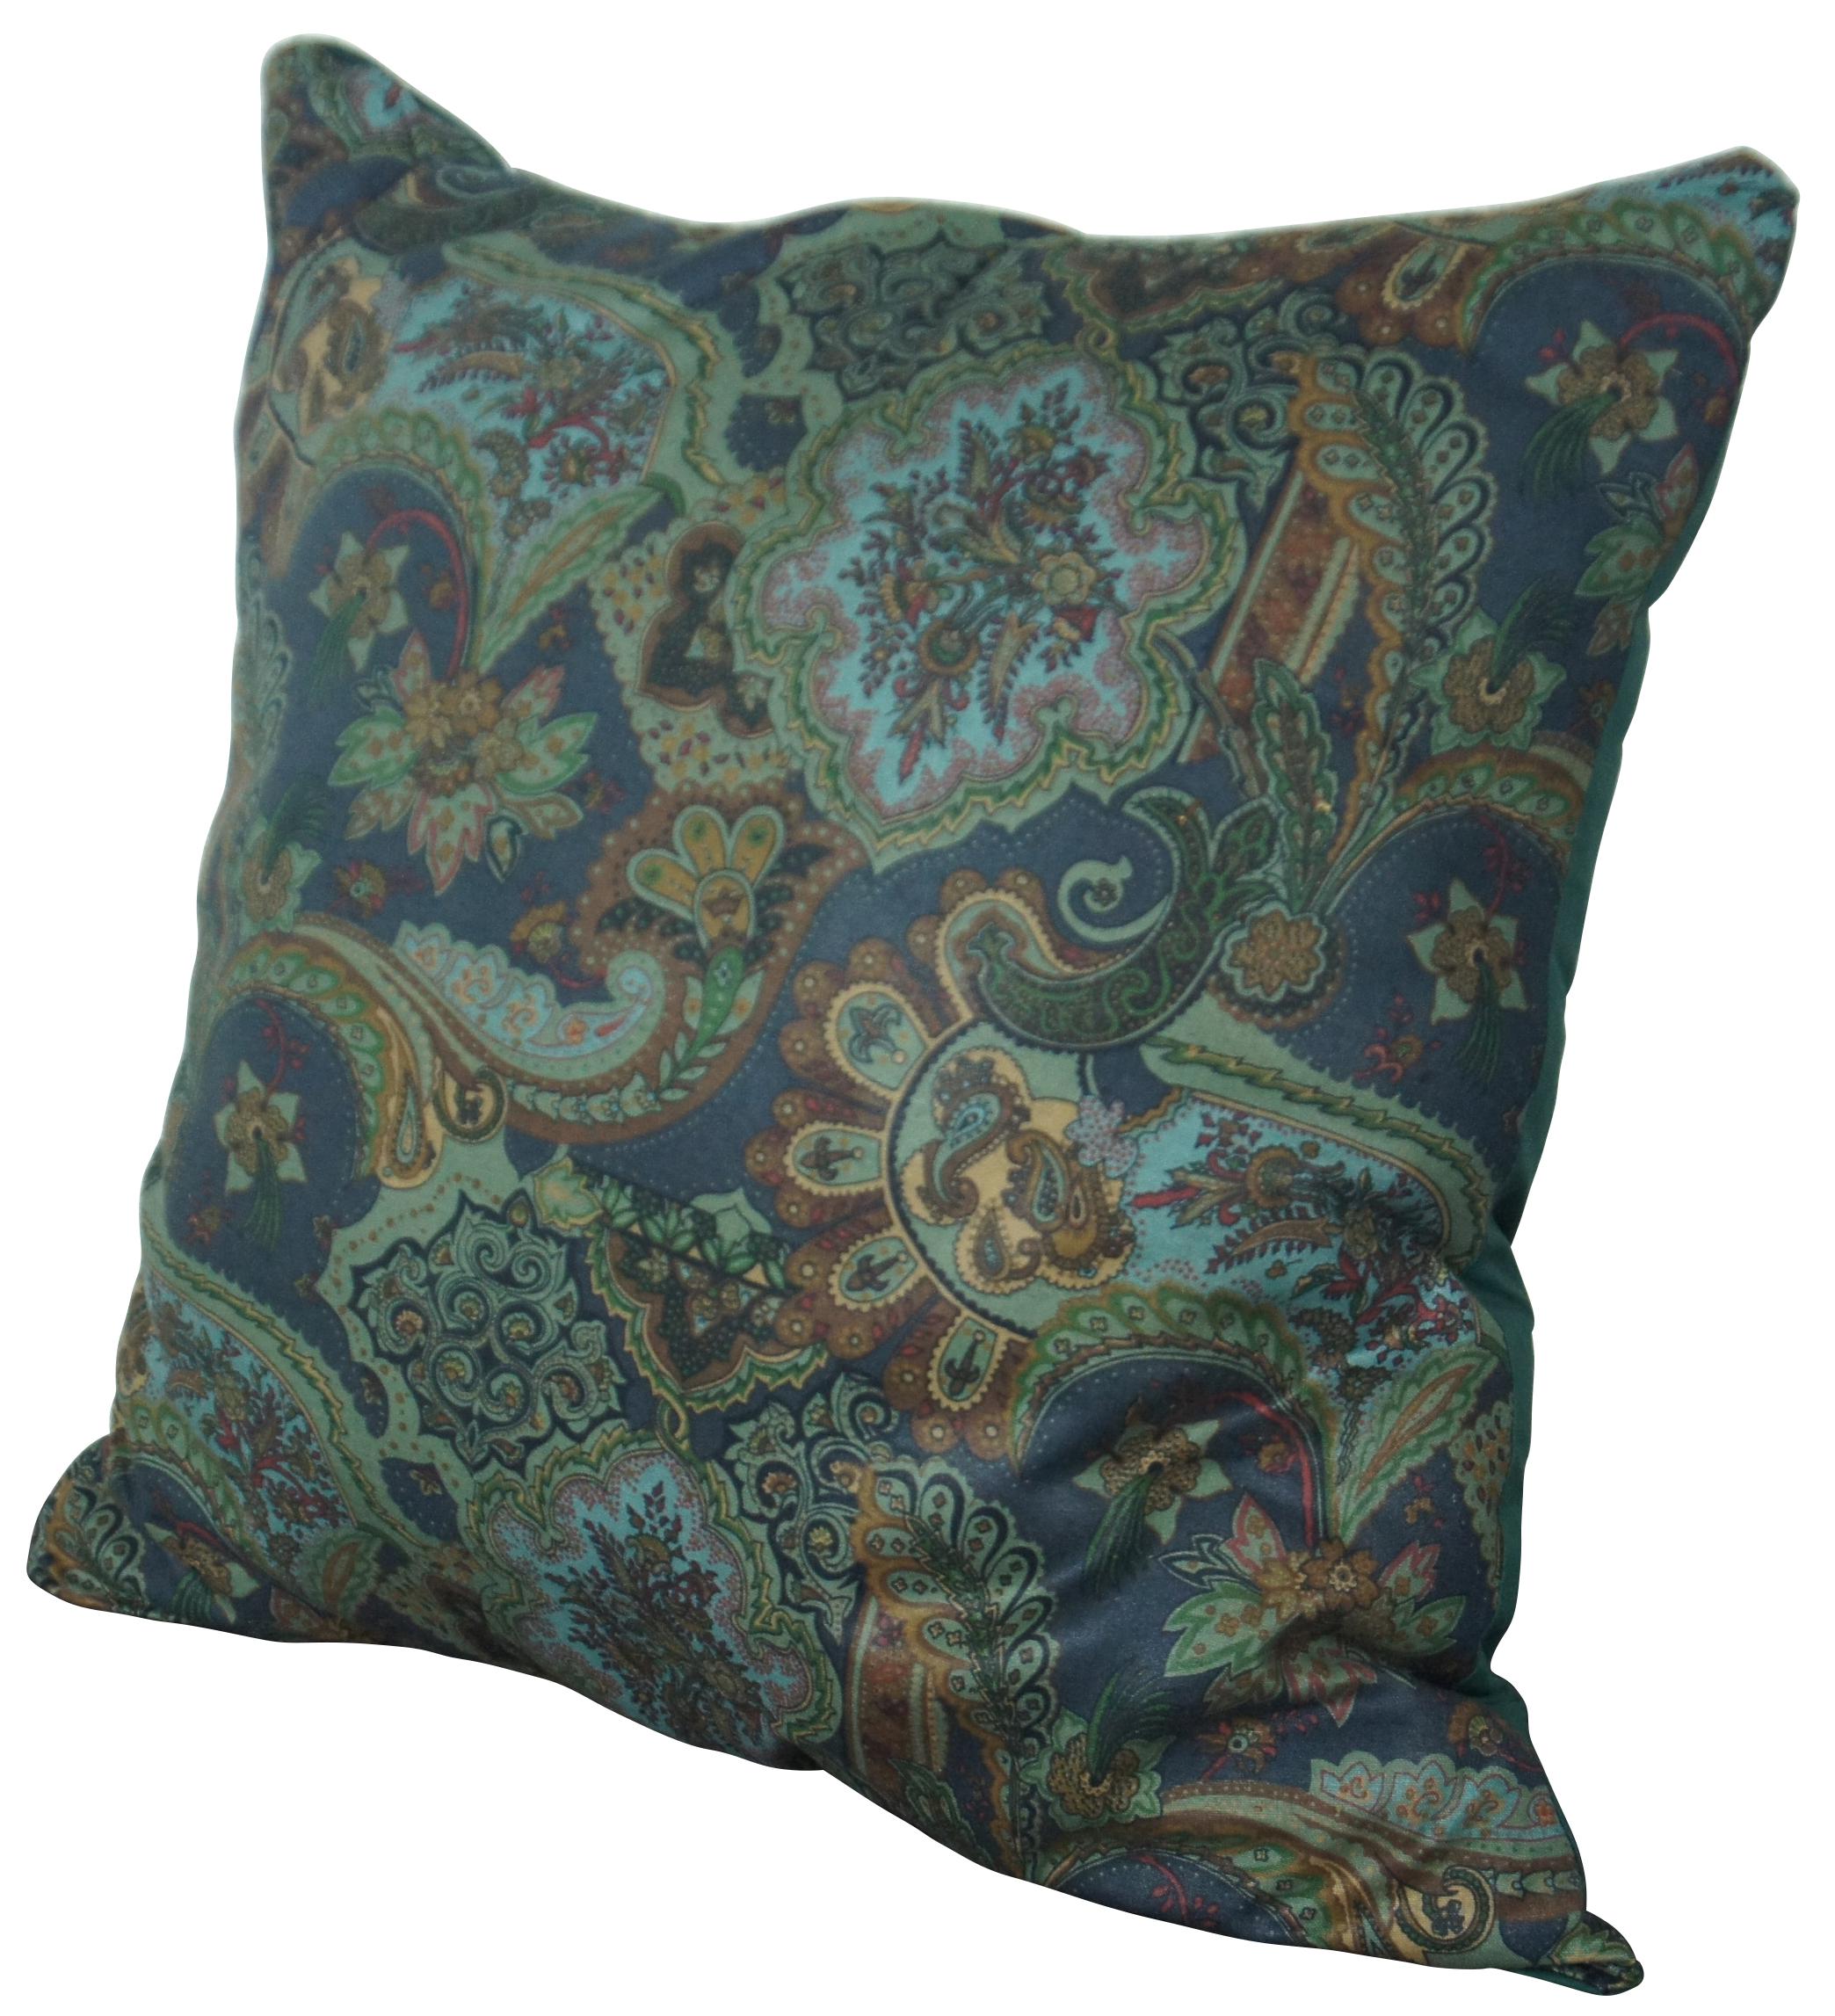 Vintage Green & Blue Linen Paisley Throw Accent Pillow Fiber Fill In Good Condition For Sale In Dayton, OH